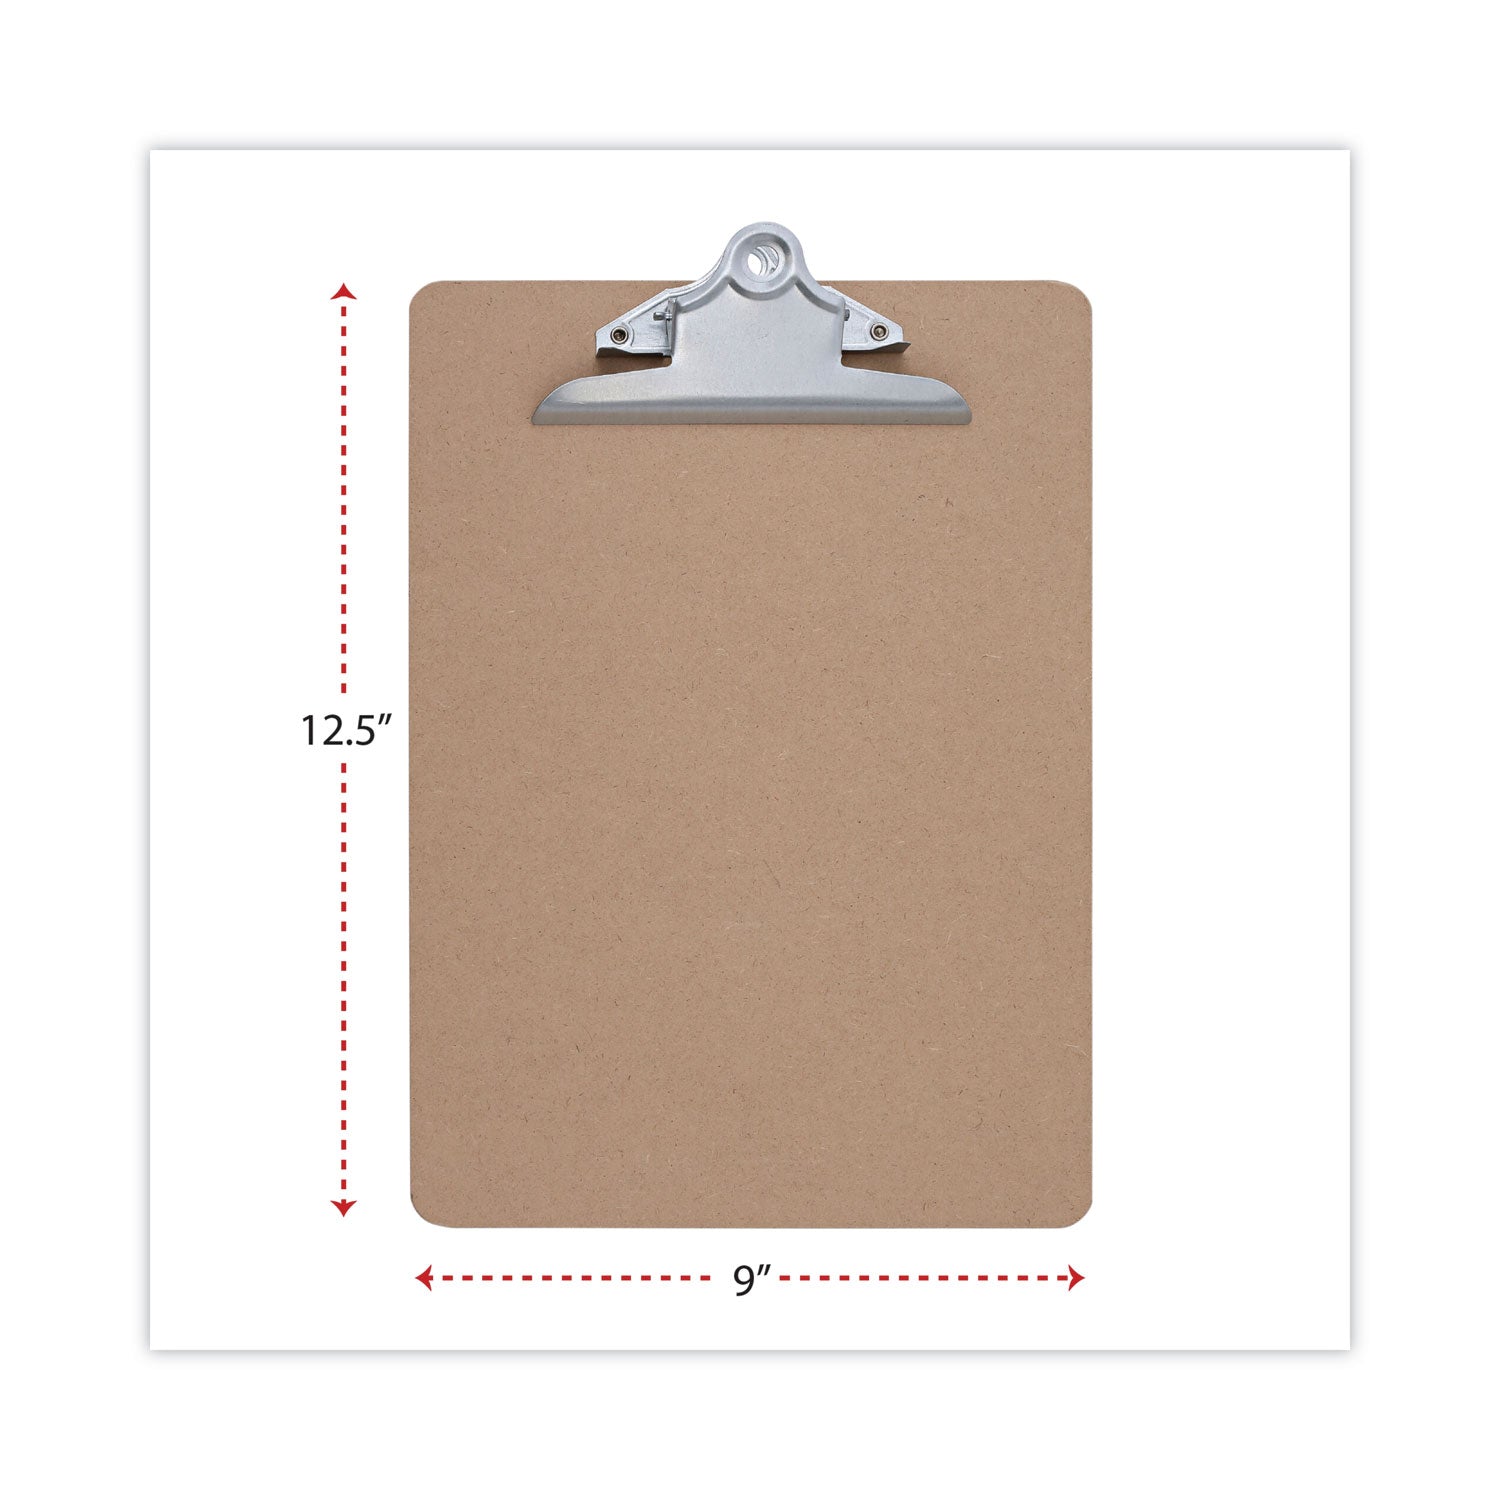 hardboard-clipboard-125-clip-capacity-holds-85-x-11-sheets-brown-3-pack_unv40304vp - 3